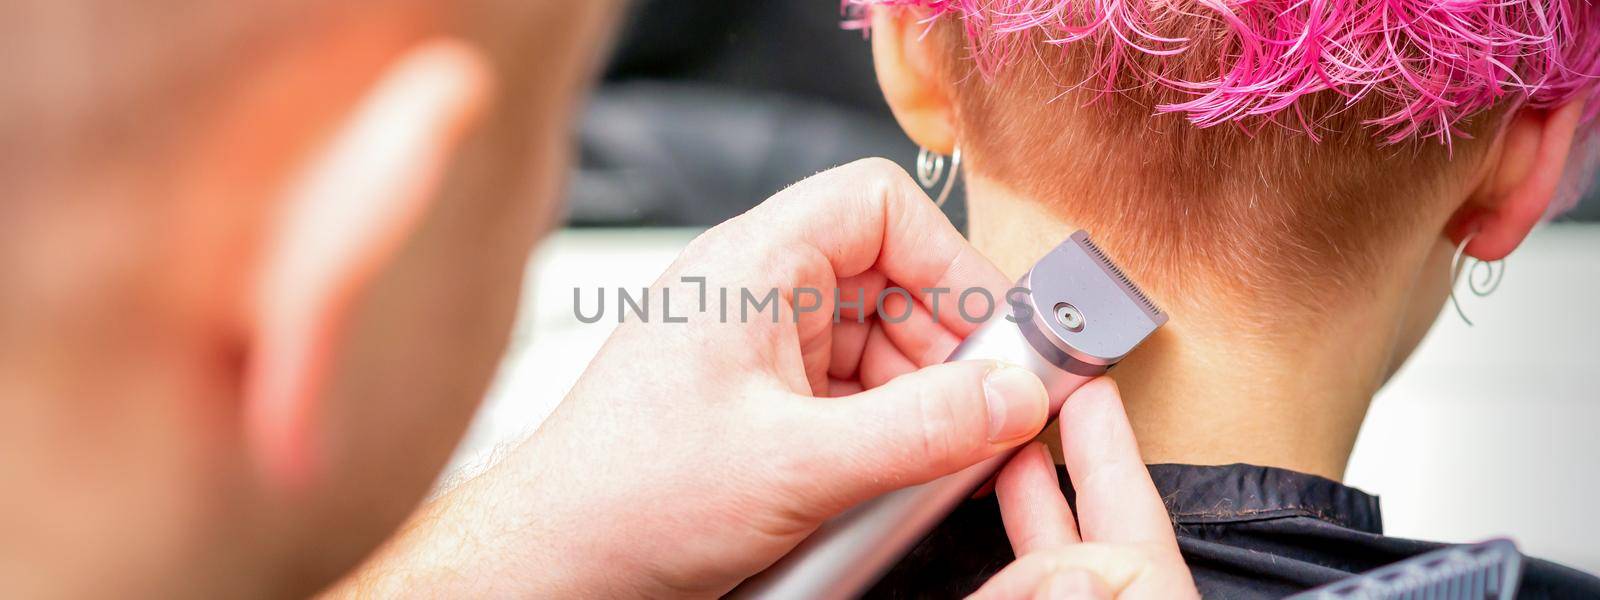 Hairdresser shaving nape and neck with electric trimmer of a young caucasian woman with short pink hair in a beauty salon. by okskukuruza